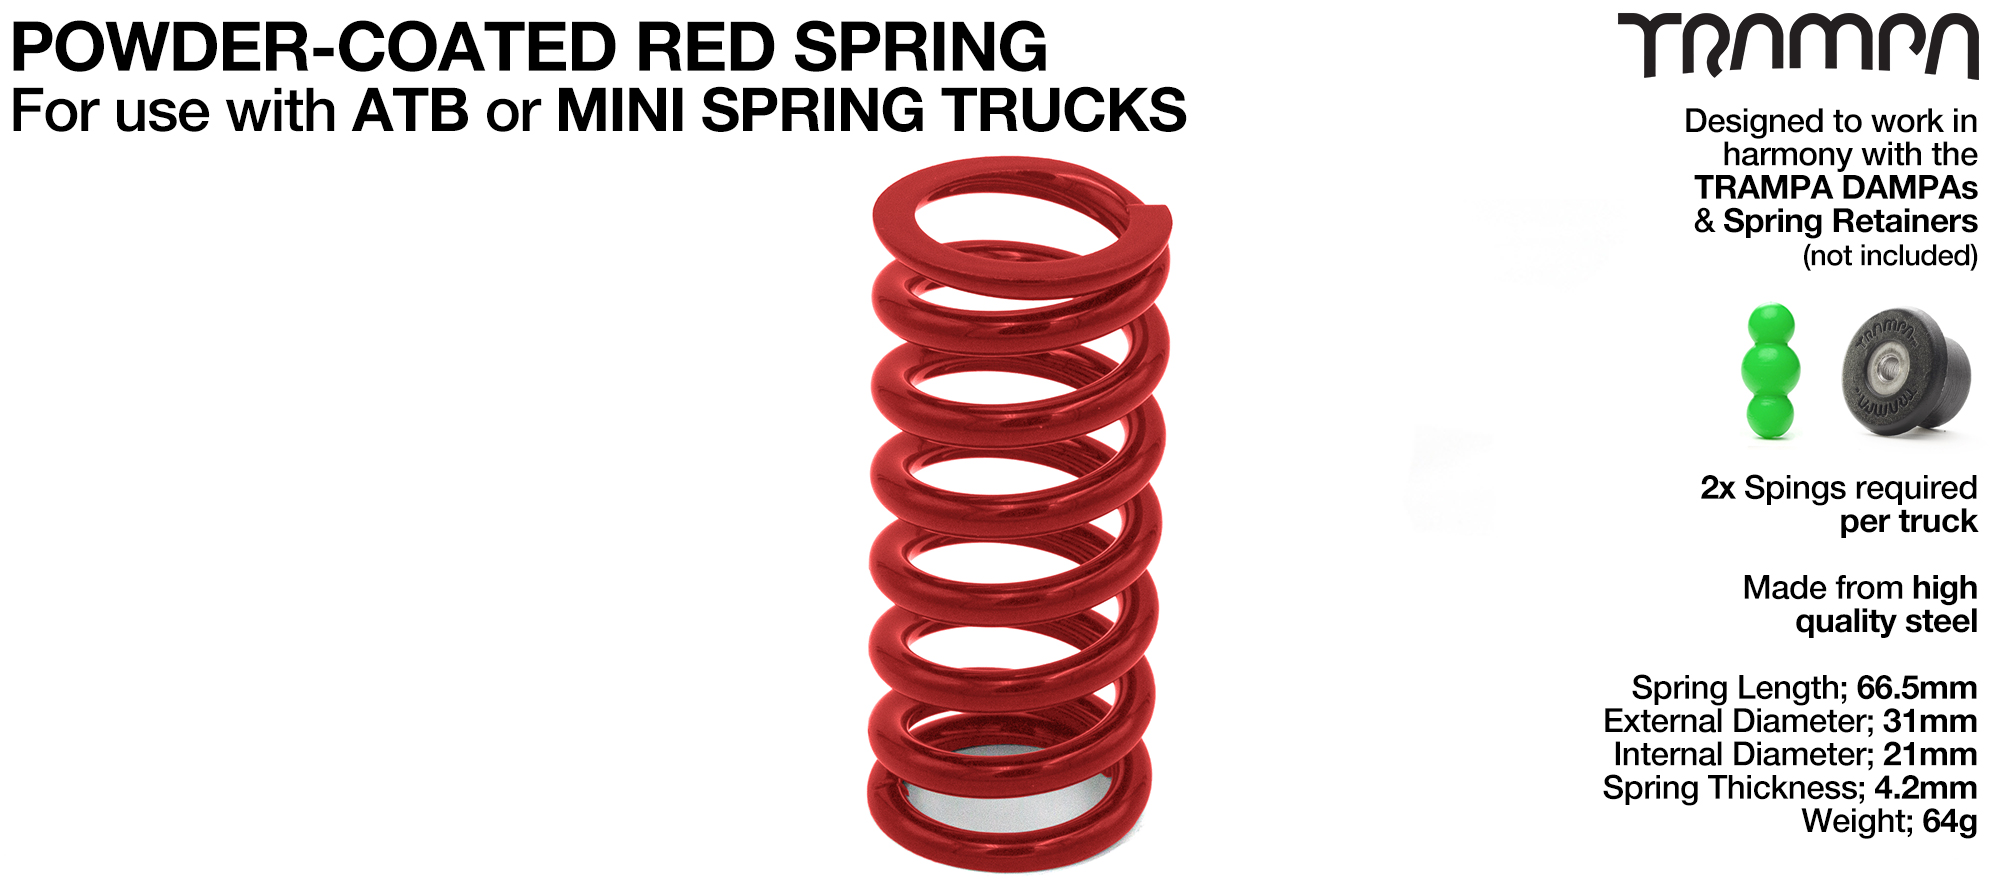 Steel Spring Powder Coated - RED